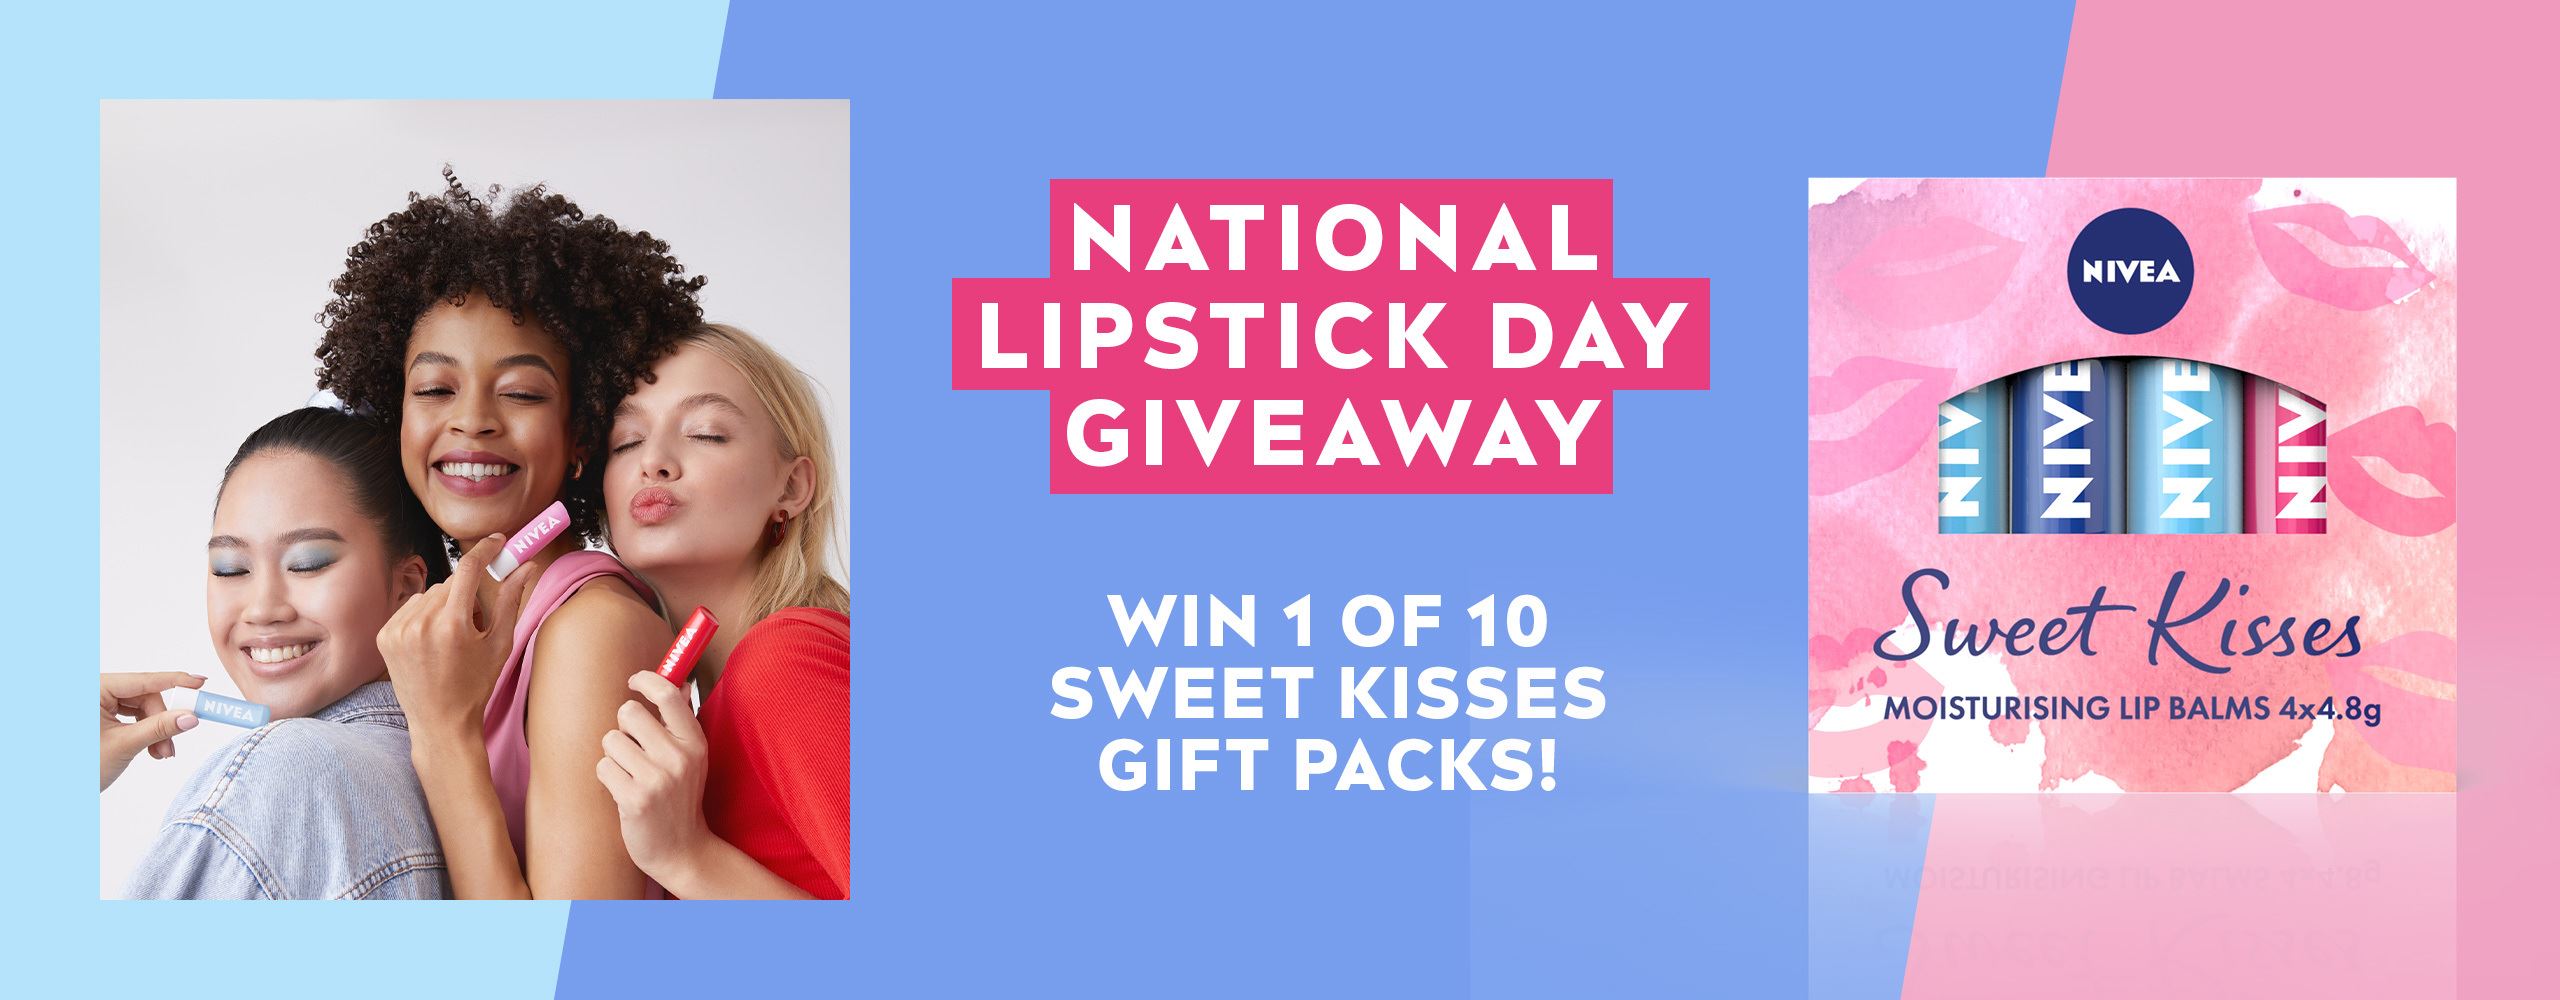 National Lipstick Day Giveaway